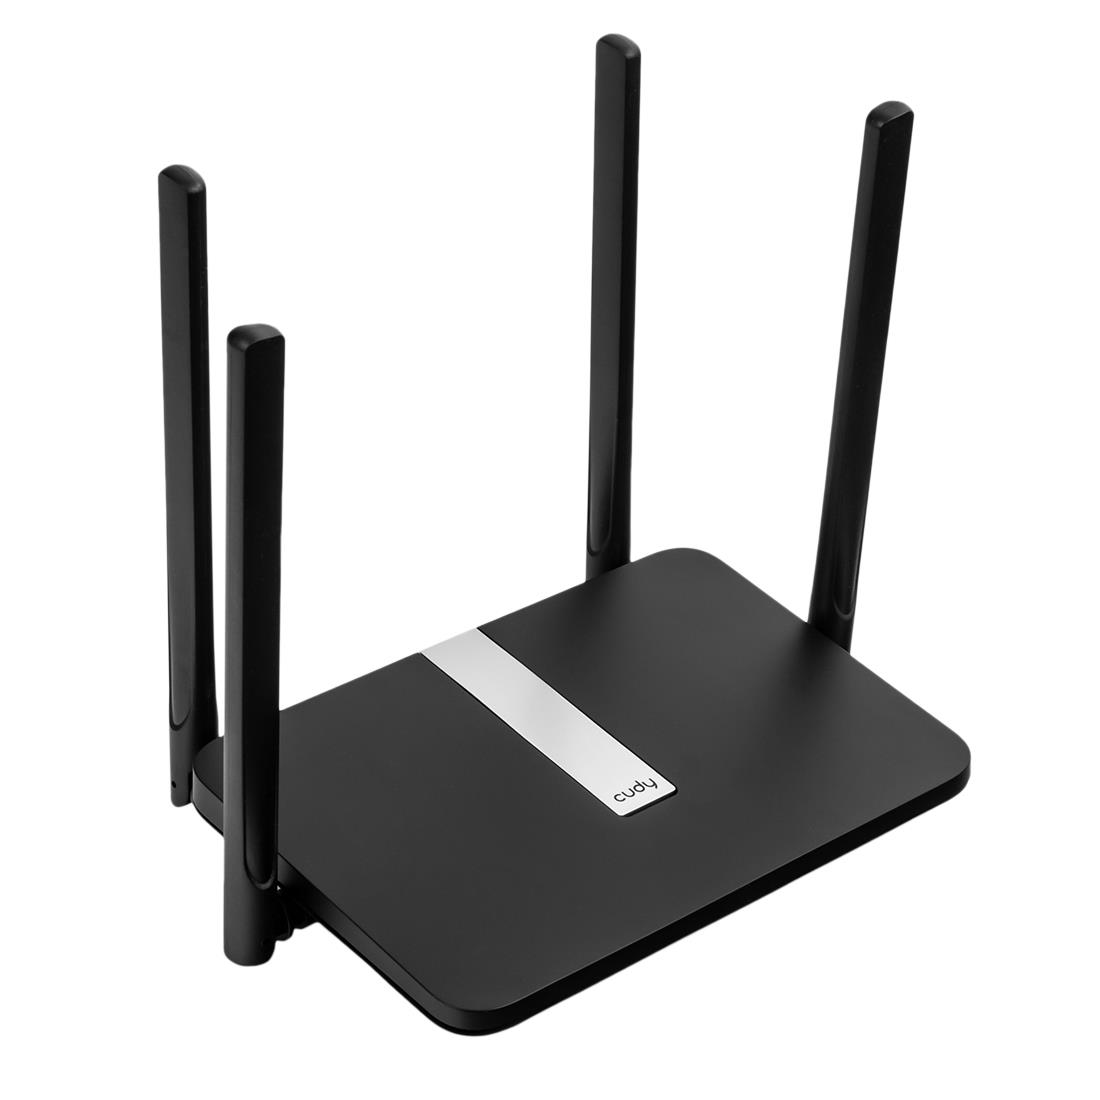 Router / Access Points